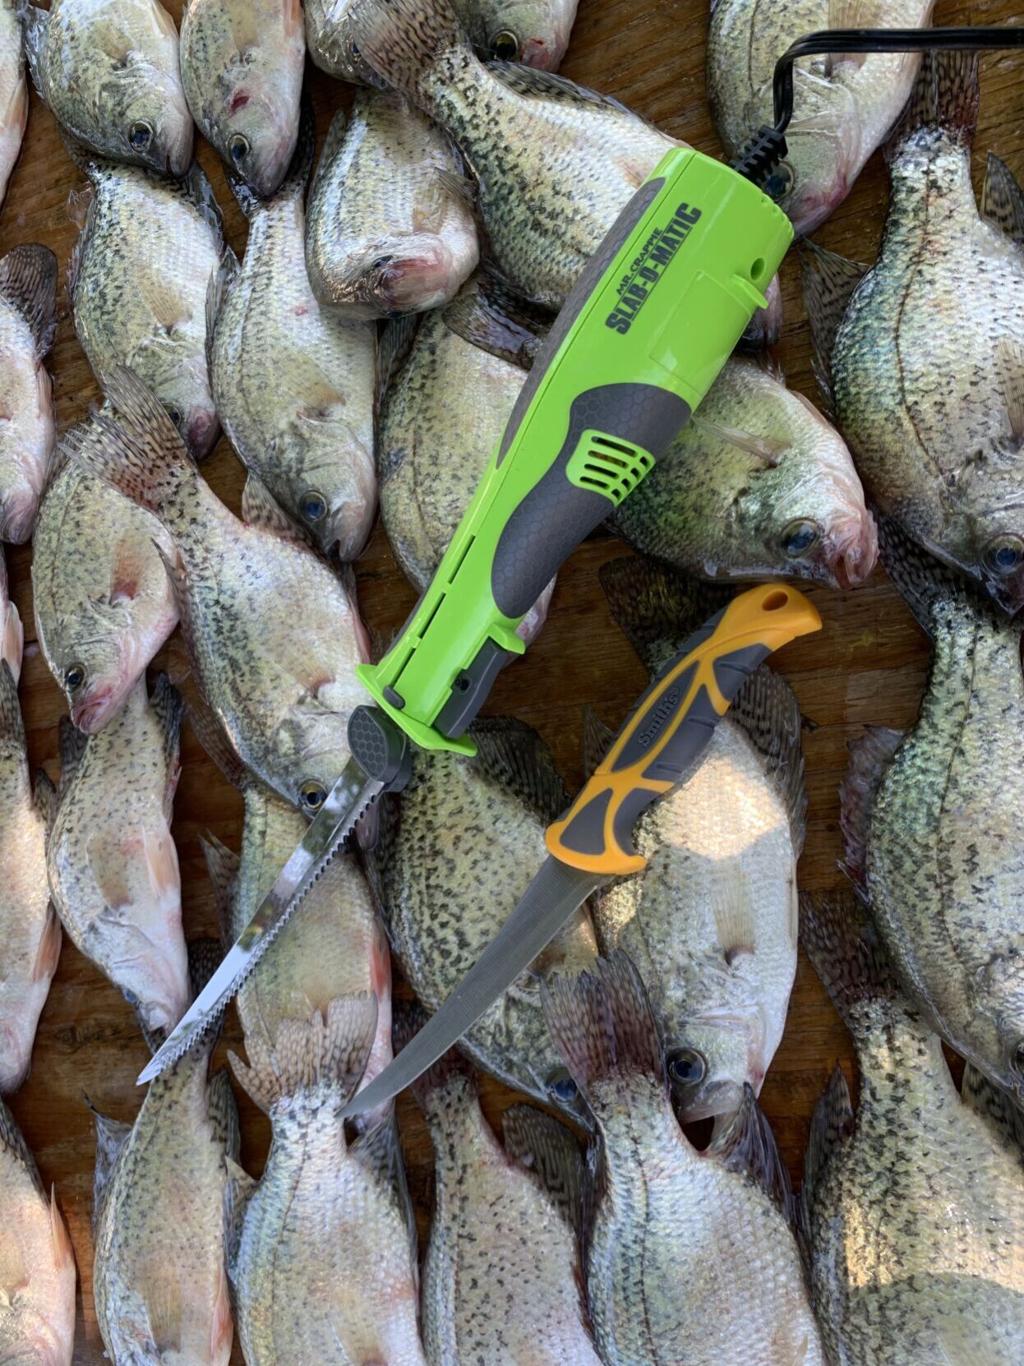 Claycomb: Pre-planning for our spring crappie fishing trips, Outdoors News